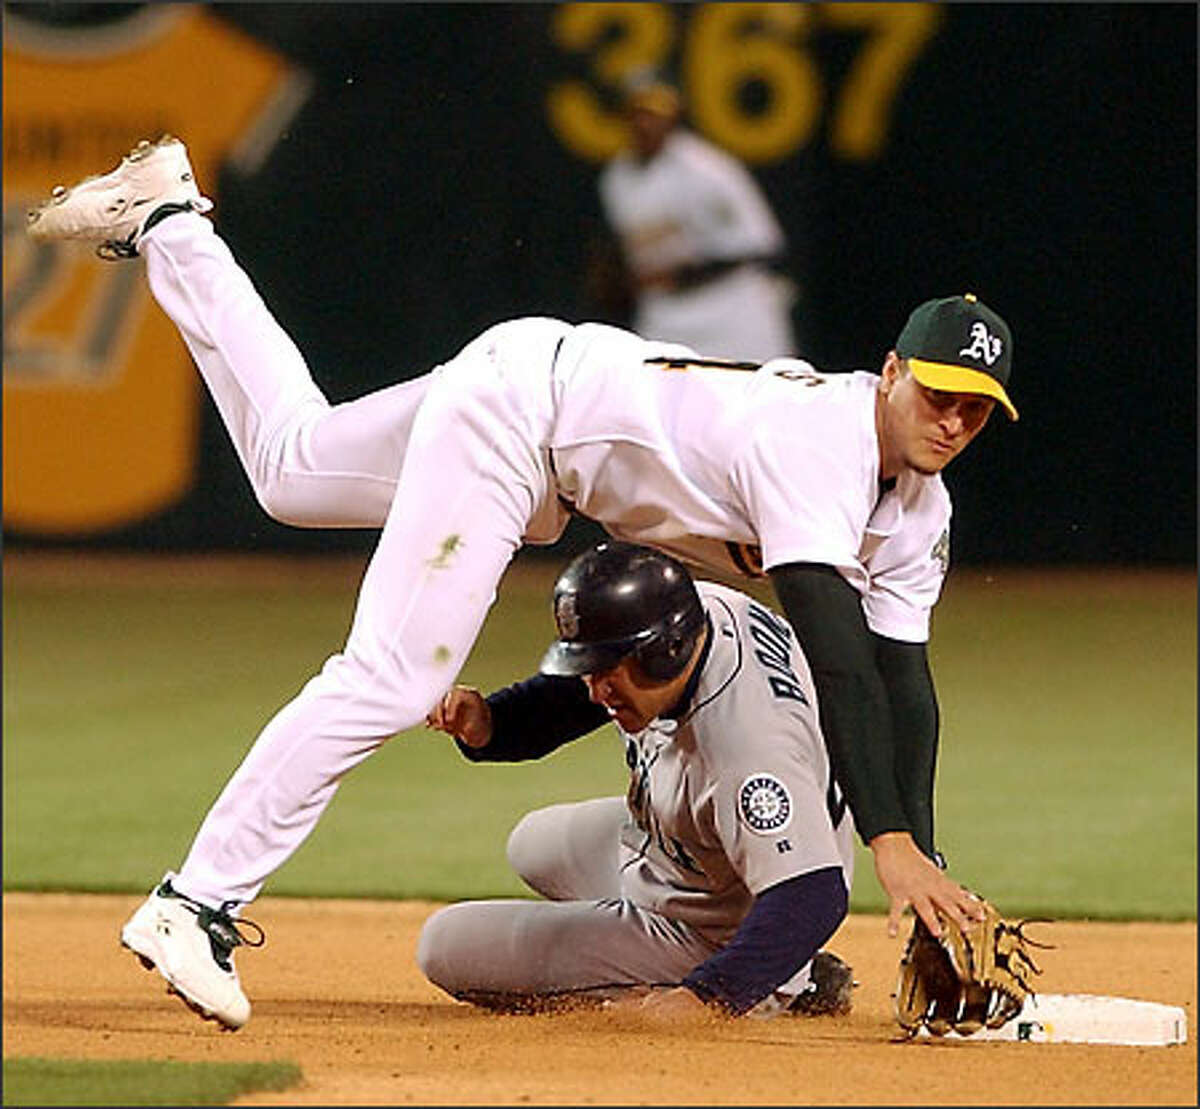 Oakland second baseman Mark Ellis falls over Boone, his Mariners counterpart, completing a double play that ended the fourth inning.